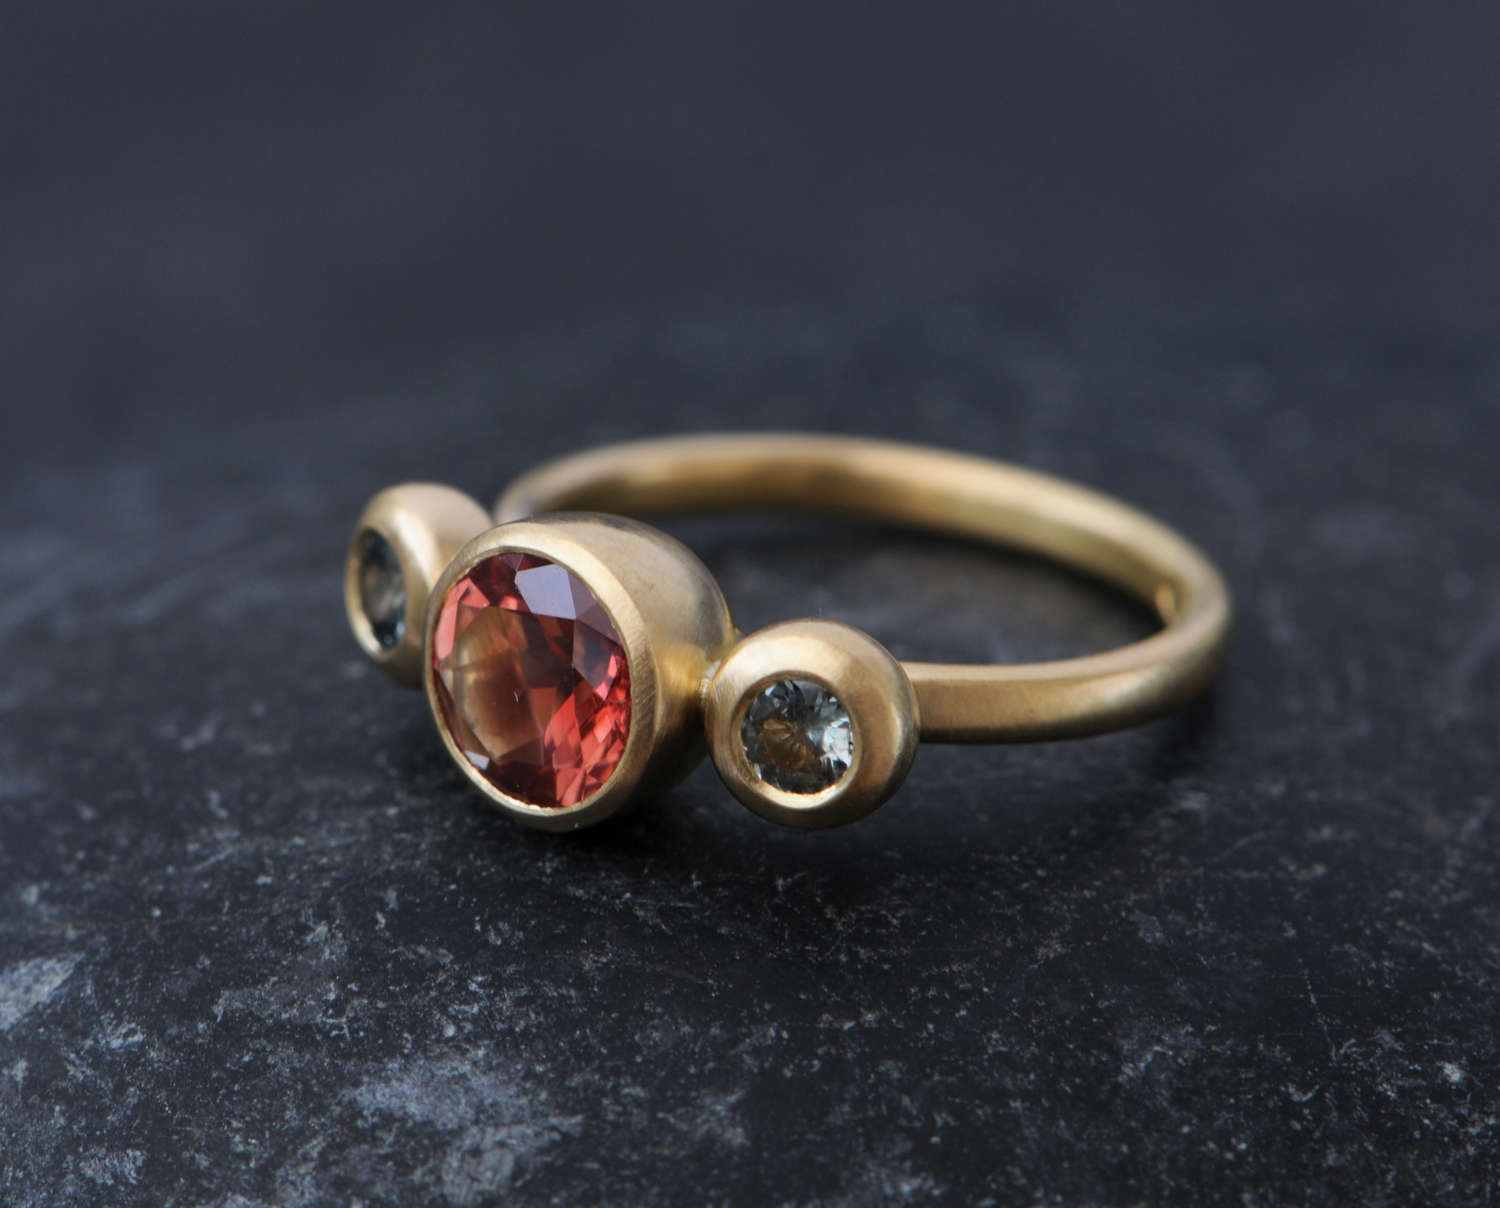 Triple-stone ring set with Montana sapphires and oregon sunstone